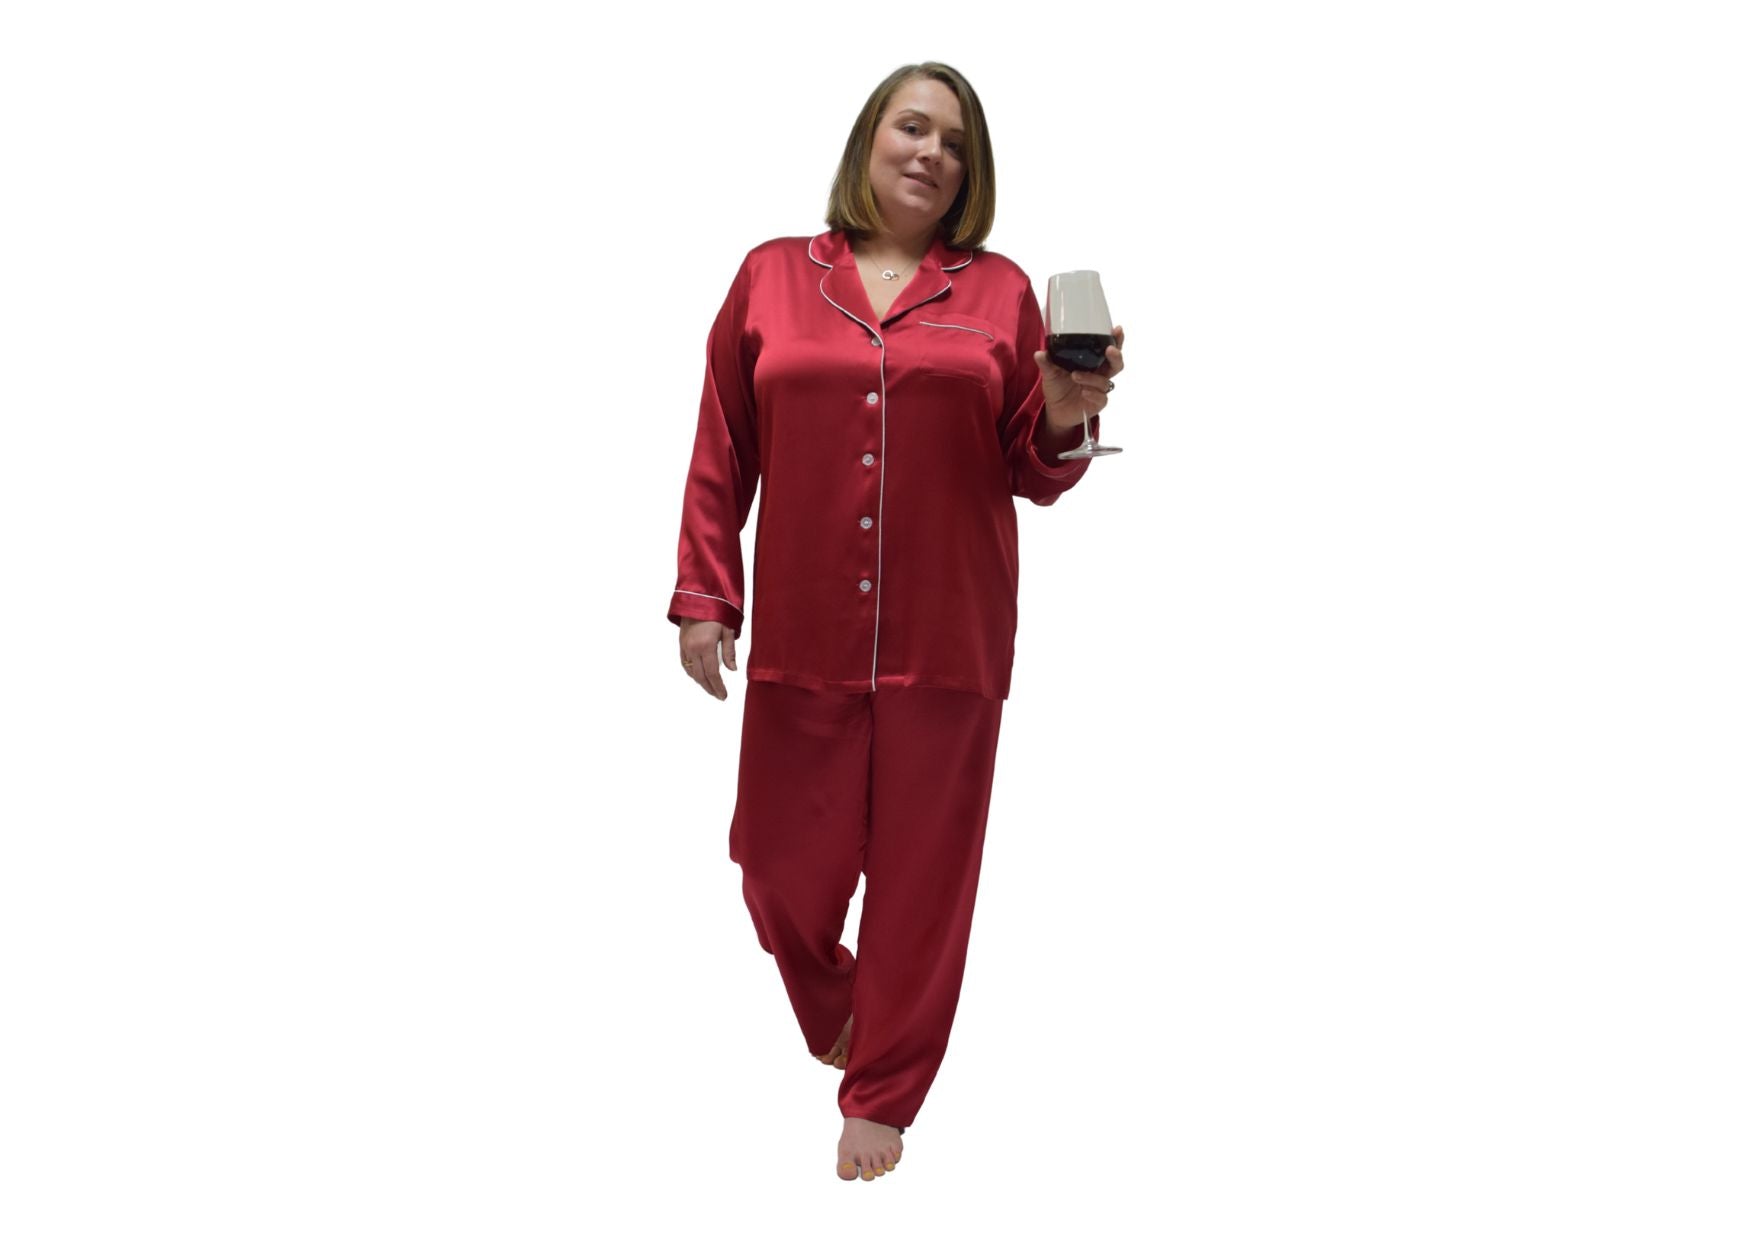  Women's Red Pajama Set - Women's Red Pajama Set -  -  - Luxurious Fine Silk by Forsters Finery